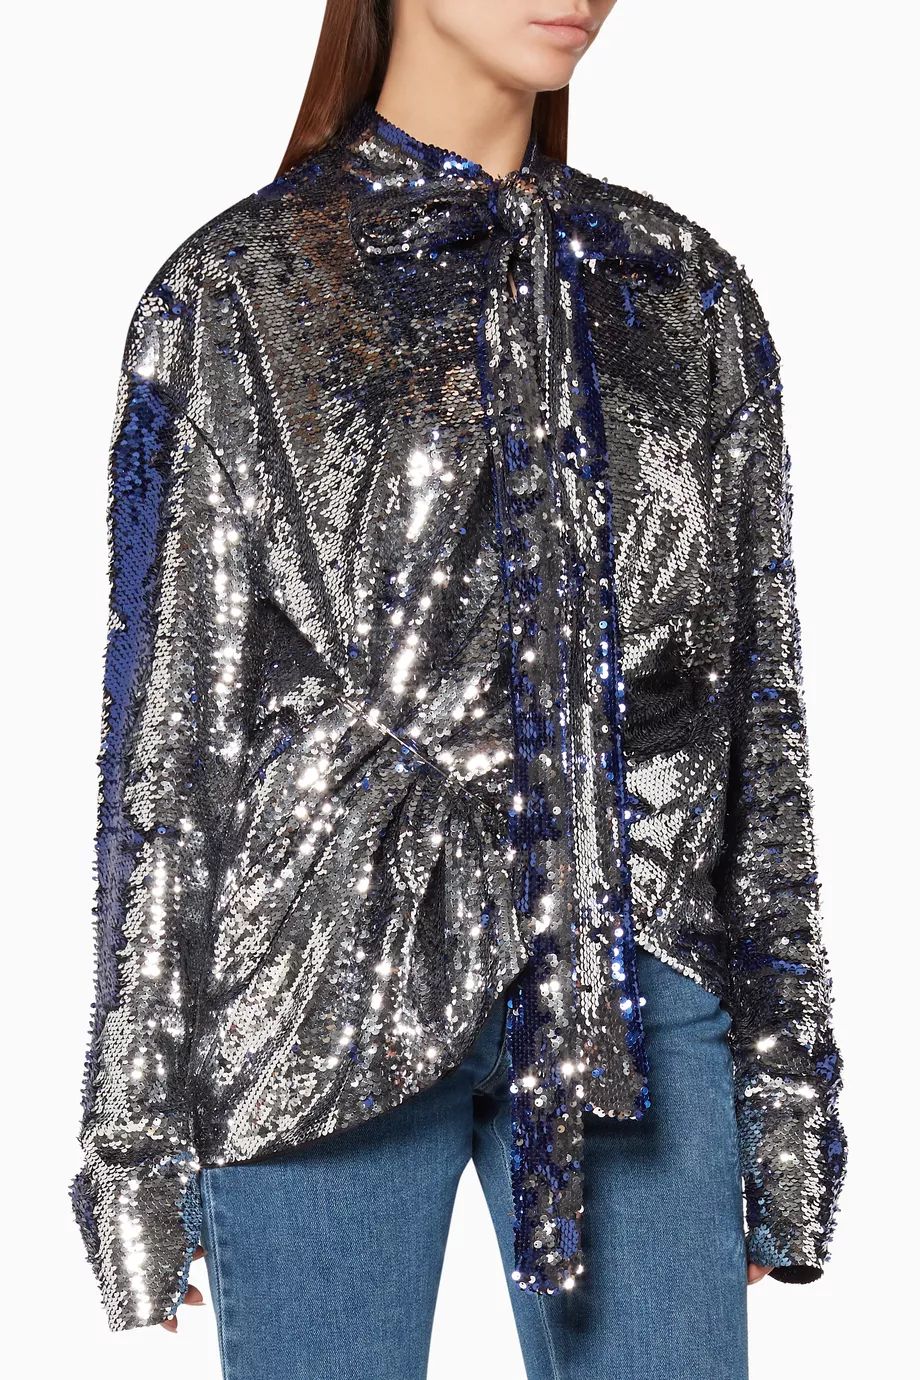 Shop Luxury Act No 1 Silver Sequin-Embellished Top | Ounass